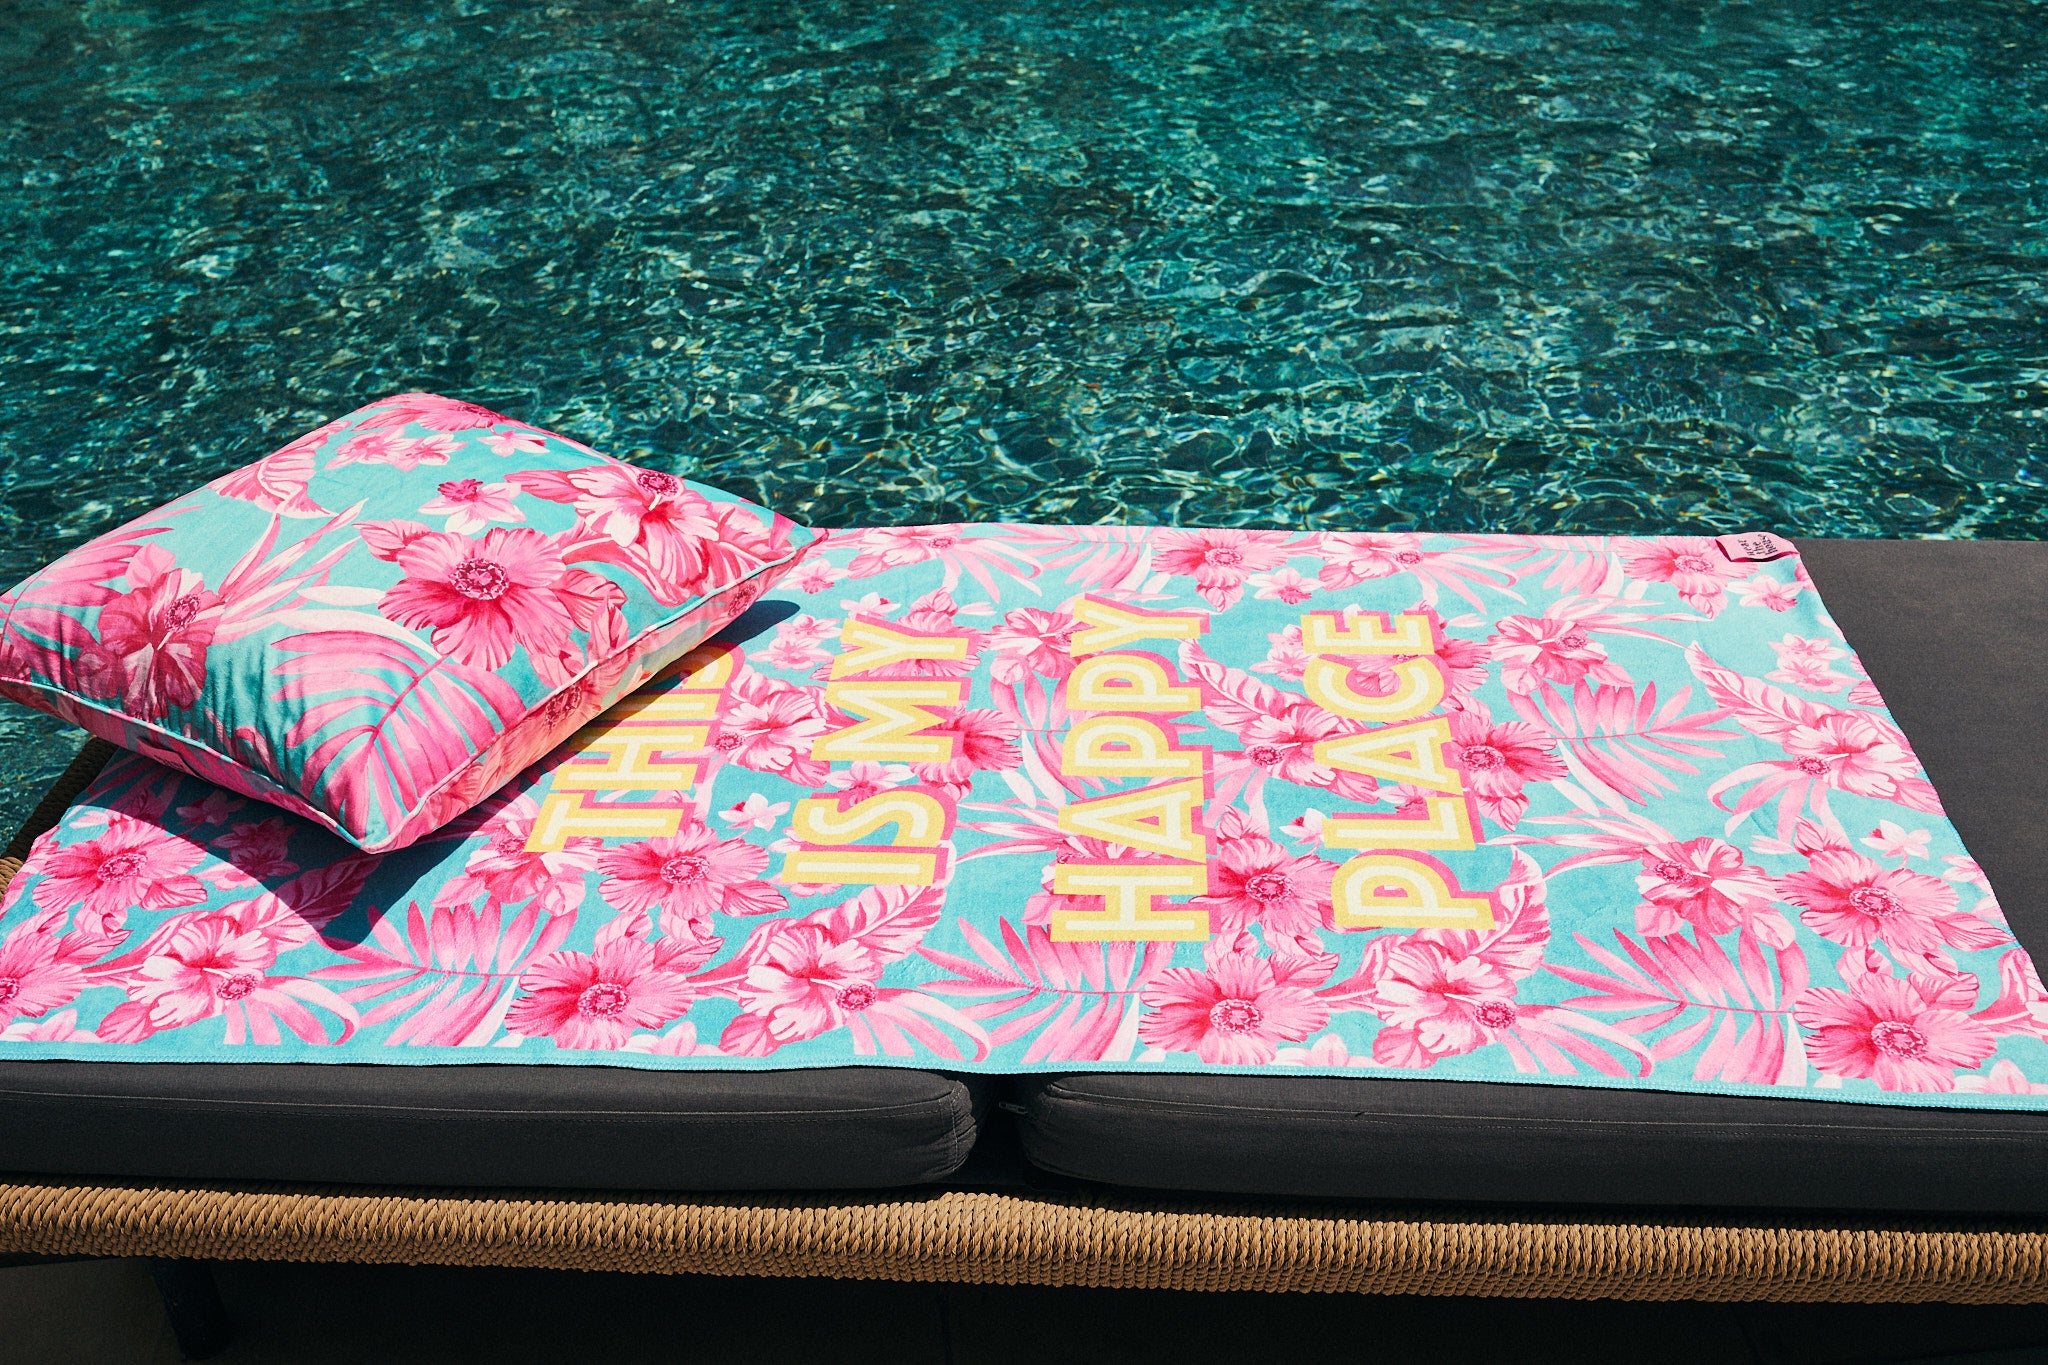 "This is My Happy Place" Beach Towel